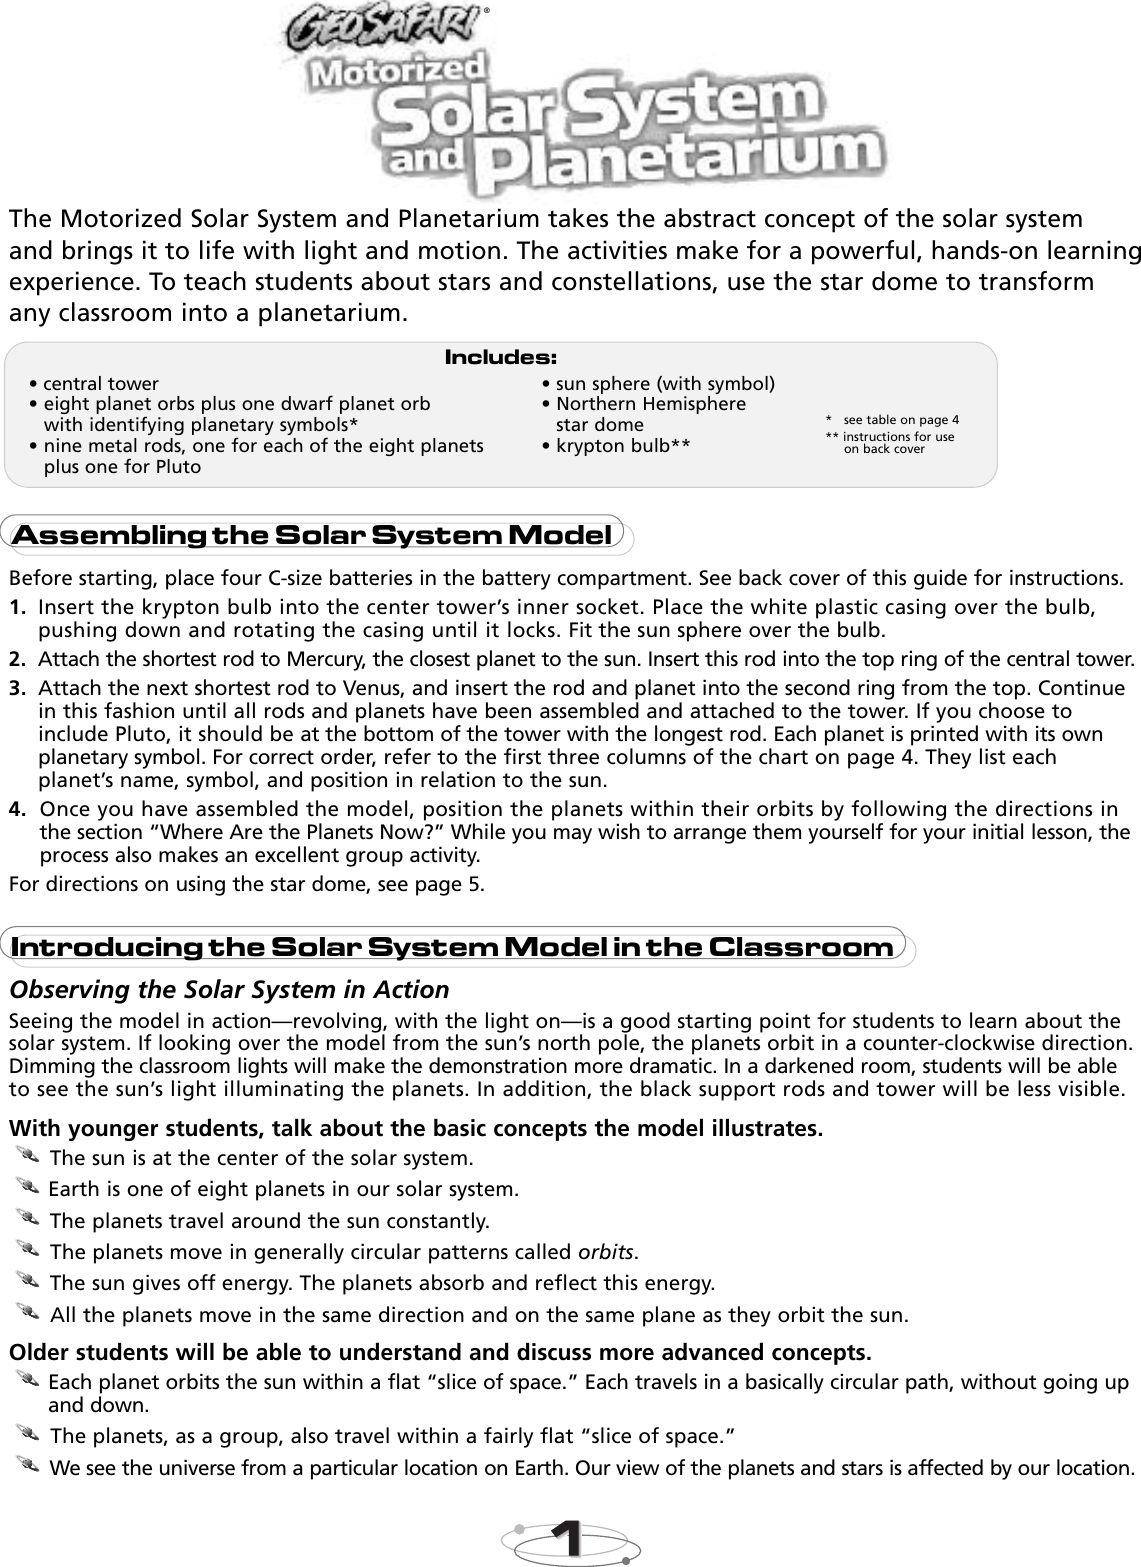 Page 2 of 8 - Educational-Insights Educational-Insights-Educational-Insights-Telescope-Ei-5237-Users-Manual- 5235 MSSysGuideRev2006  Educational-insights-educational-insights-telescope-ei-5237-users-manual